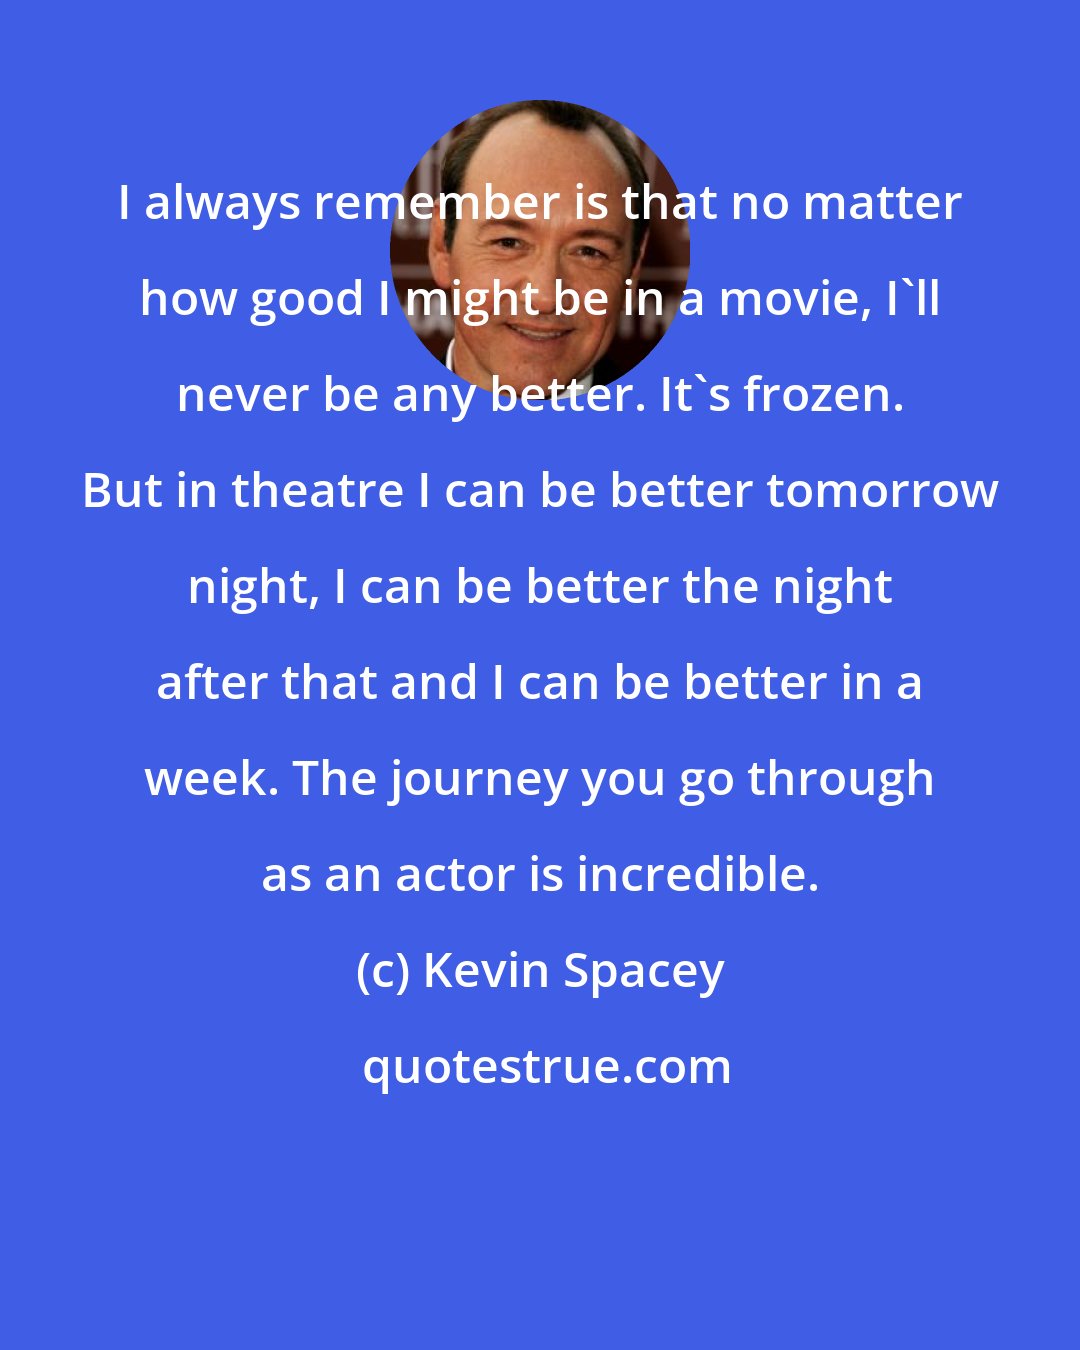 Kevin Spacey: I always remember is that no matter how good I might be in a movie, I'll never be any better. It's frozen. But in theatre I can be better tomorrow night, I can be better the night after that and I can be better in a week. The journey you go through as an actor is incredible.